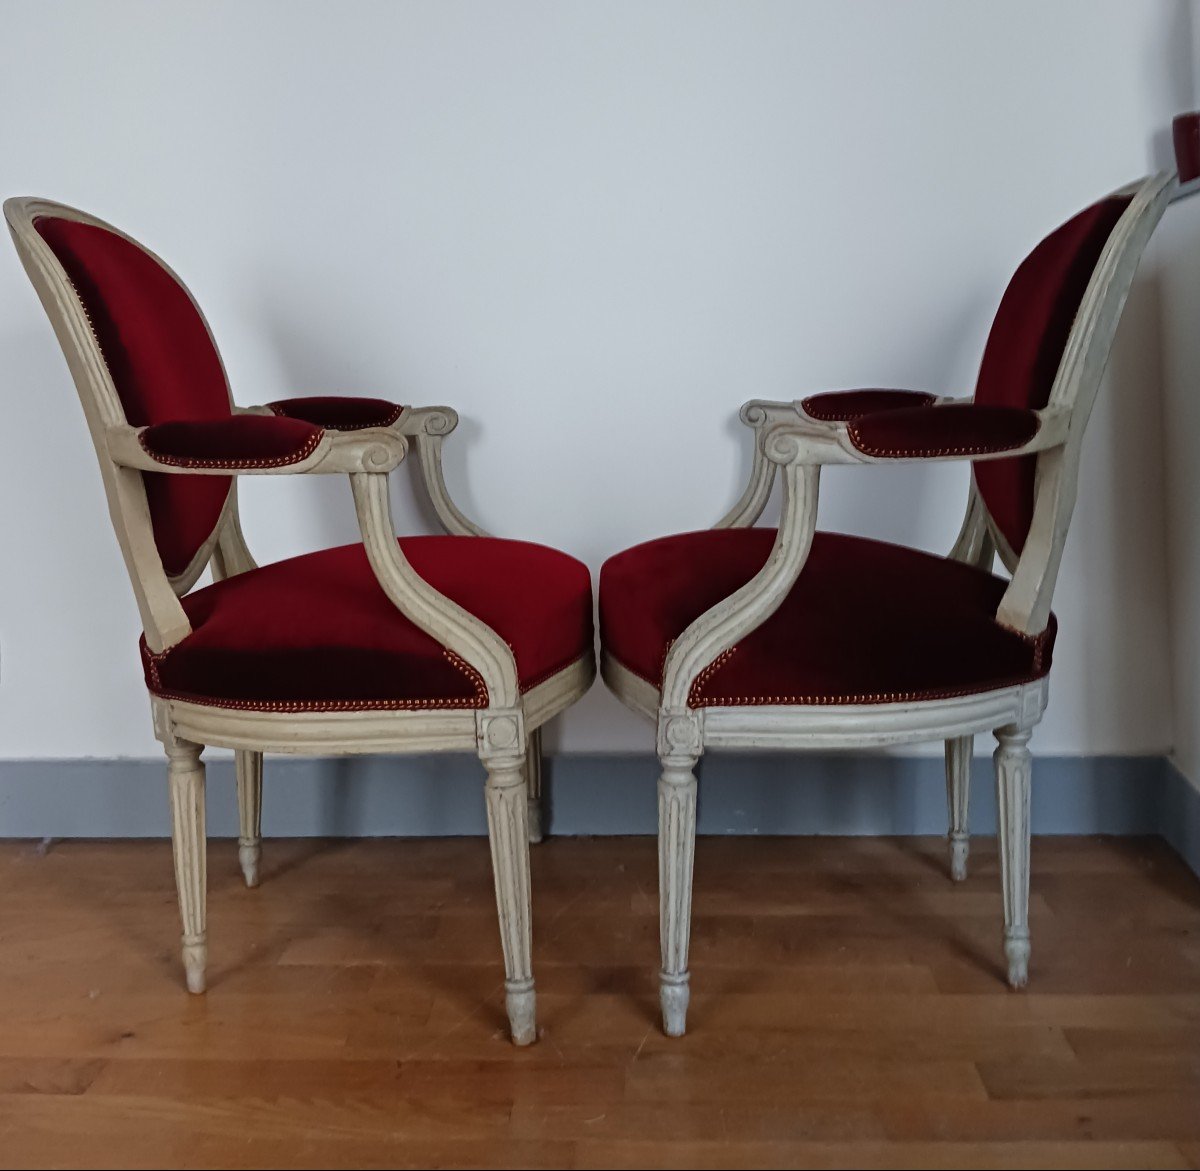 Claude Gorgu, Master In 1770 - Pair Of Cabriolet Armchairs - Restored - Mottled Velvet - Inventory Number-photo-4